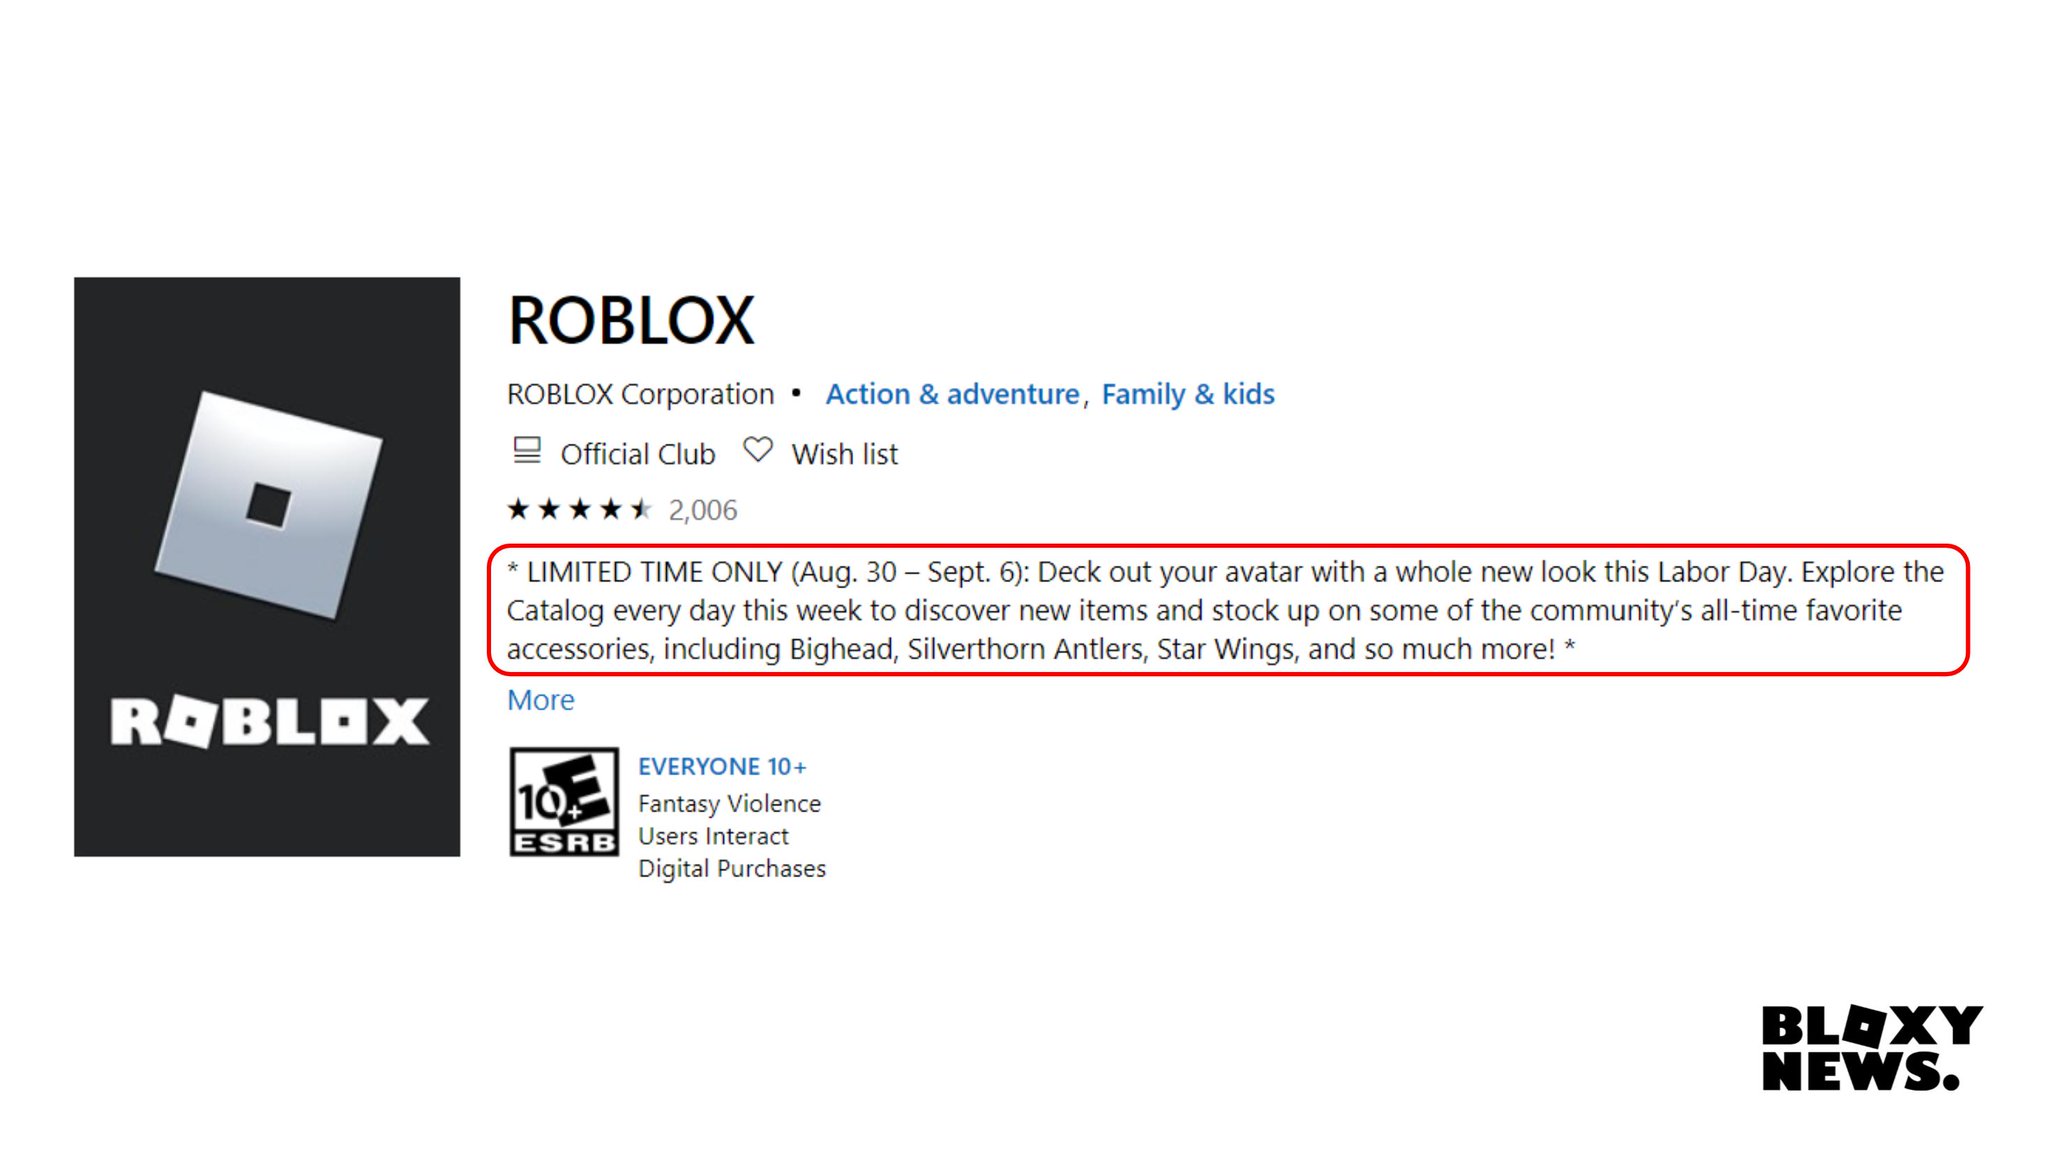 Bloxy News On Twitter Bloxynews According To Roblox On The Microsoft Store We Will Be Getting A Labordaysale Starting Tomorrow A Few Items That Are Already Confirmed Are Big Head